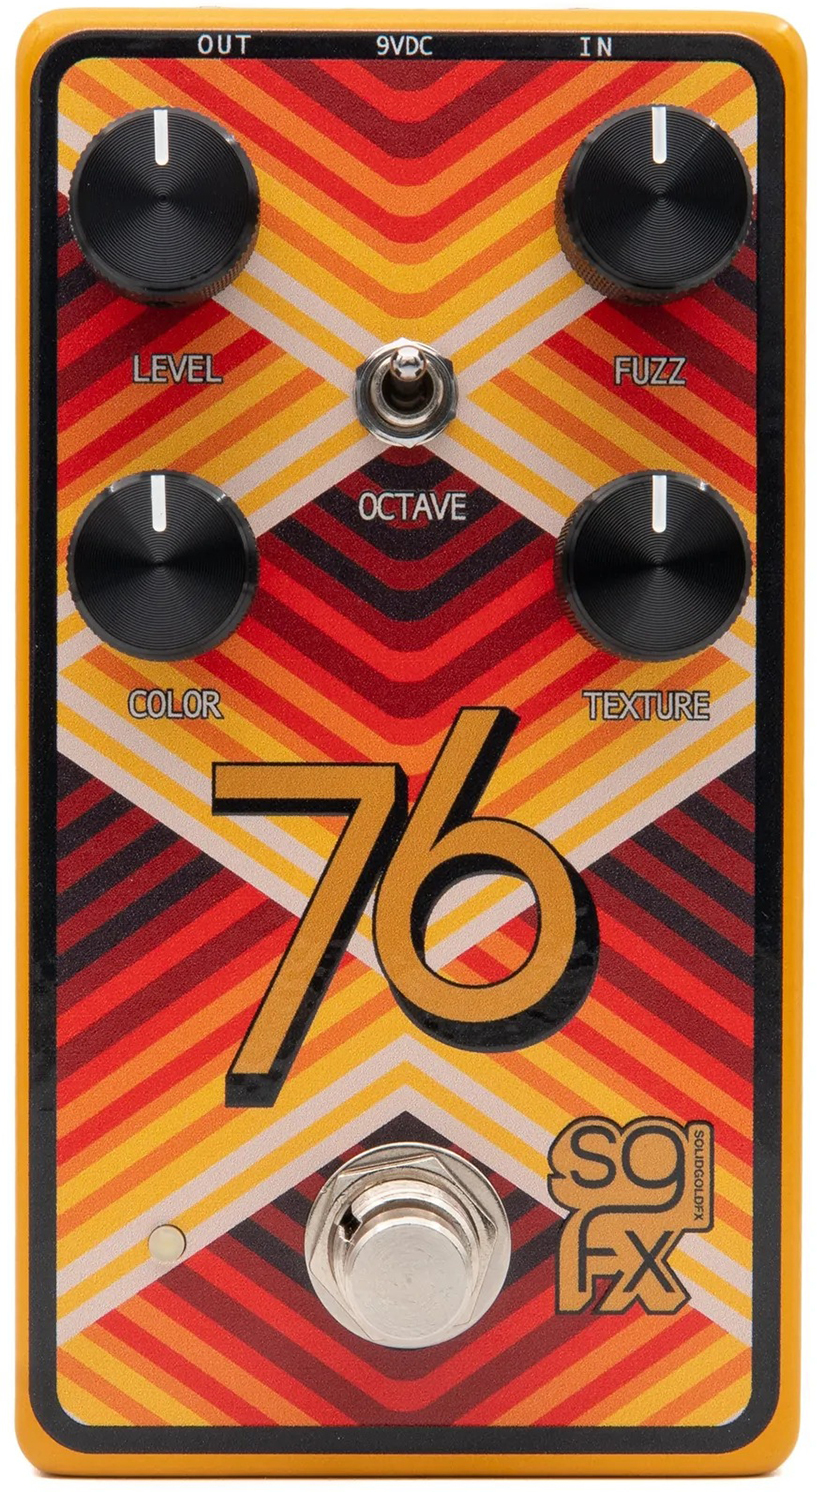 Solidgoldfx 76 Mkii Octave-up Fuzz - Overdrive, distortion & fuzz effect pedal - Main picture